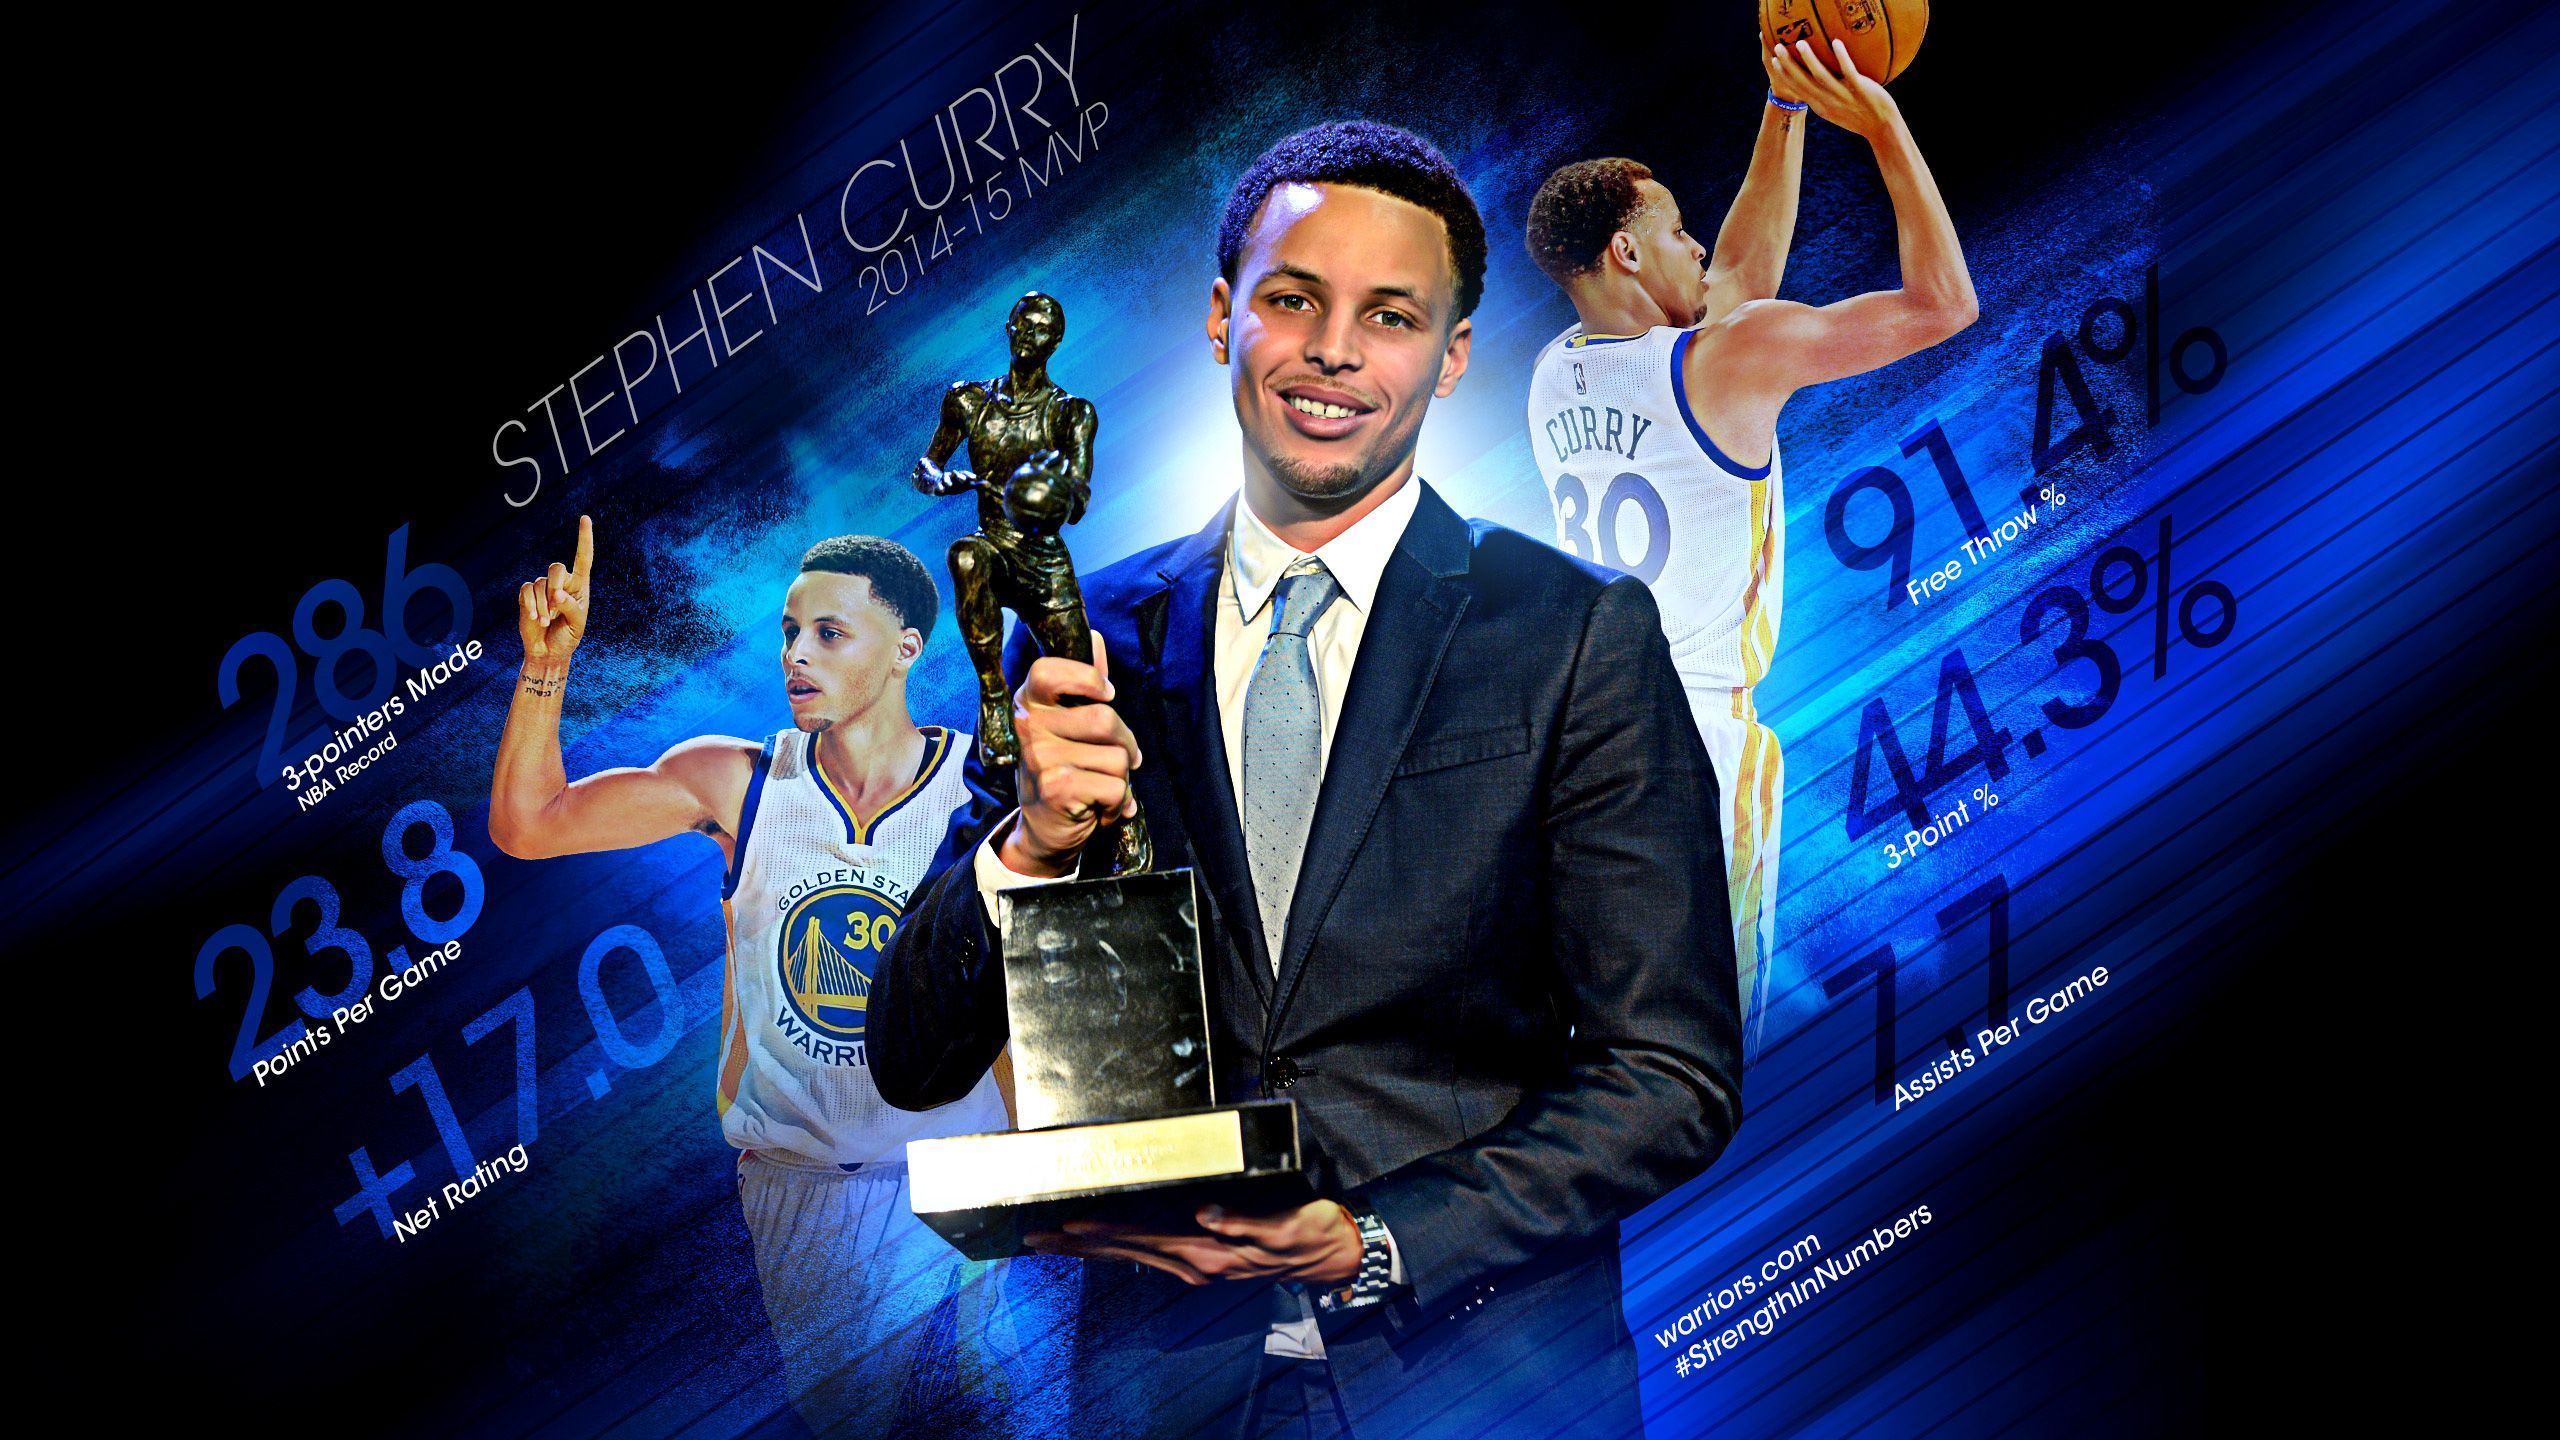 Stephen Curry desktop background Wallpapers, Backgrounds, Images